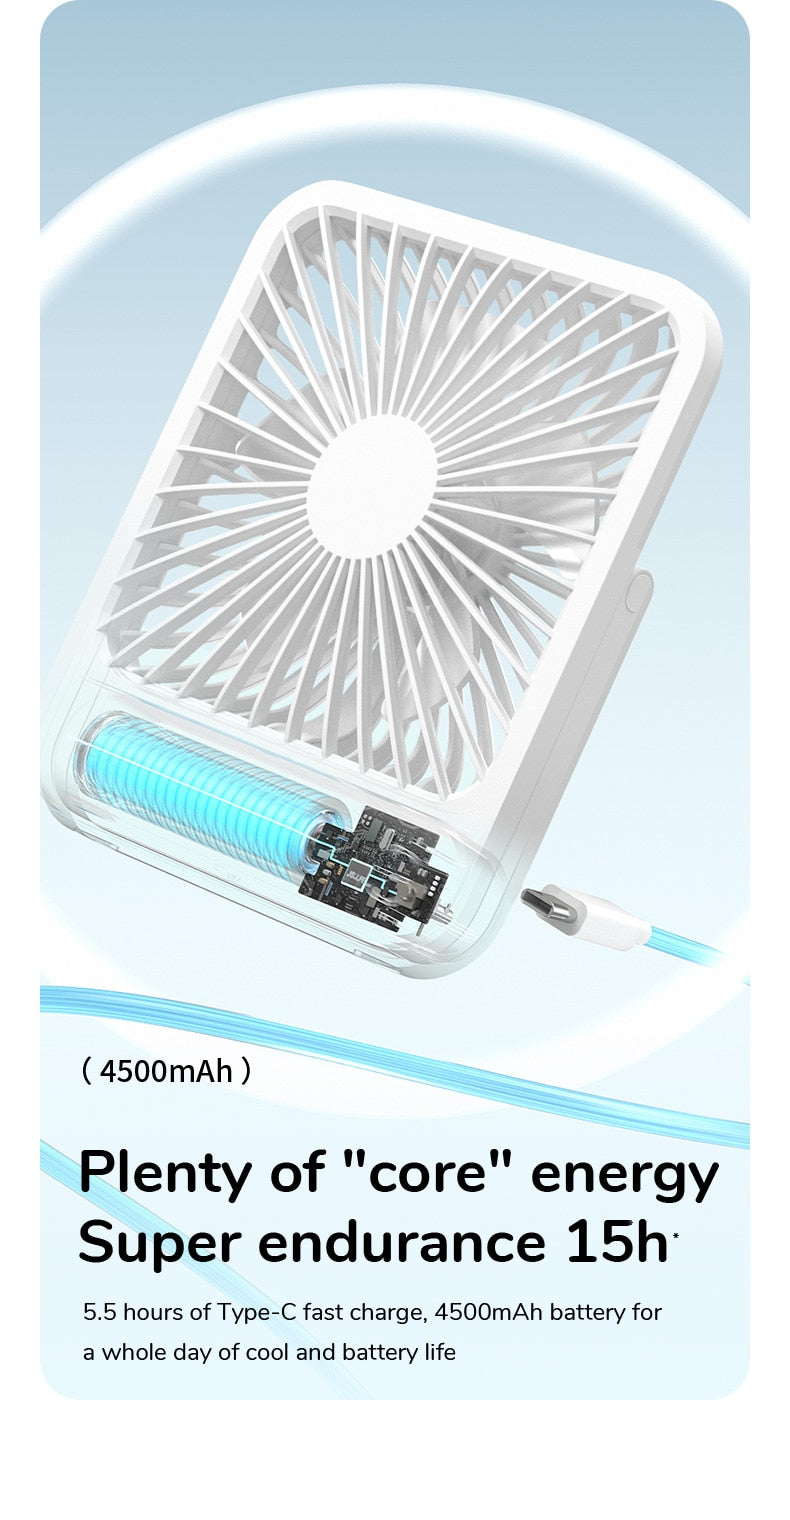 Ultra Quiet Portable Small Desk Fan - USB Rechargeable Cooling Fan with 4 Speeds and Powerful Wind - Ideal for Offices